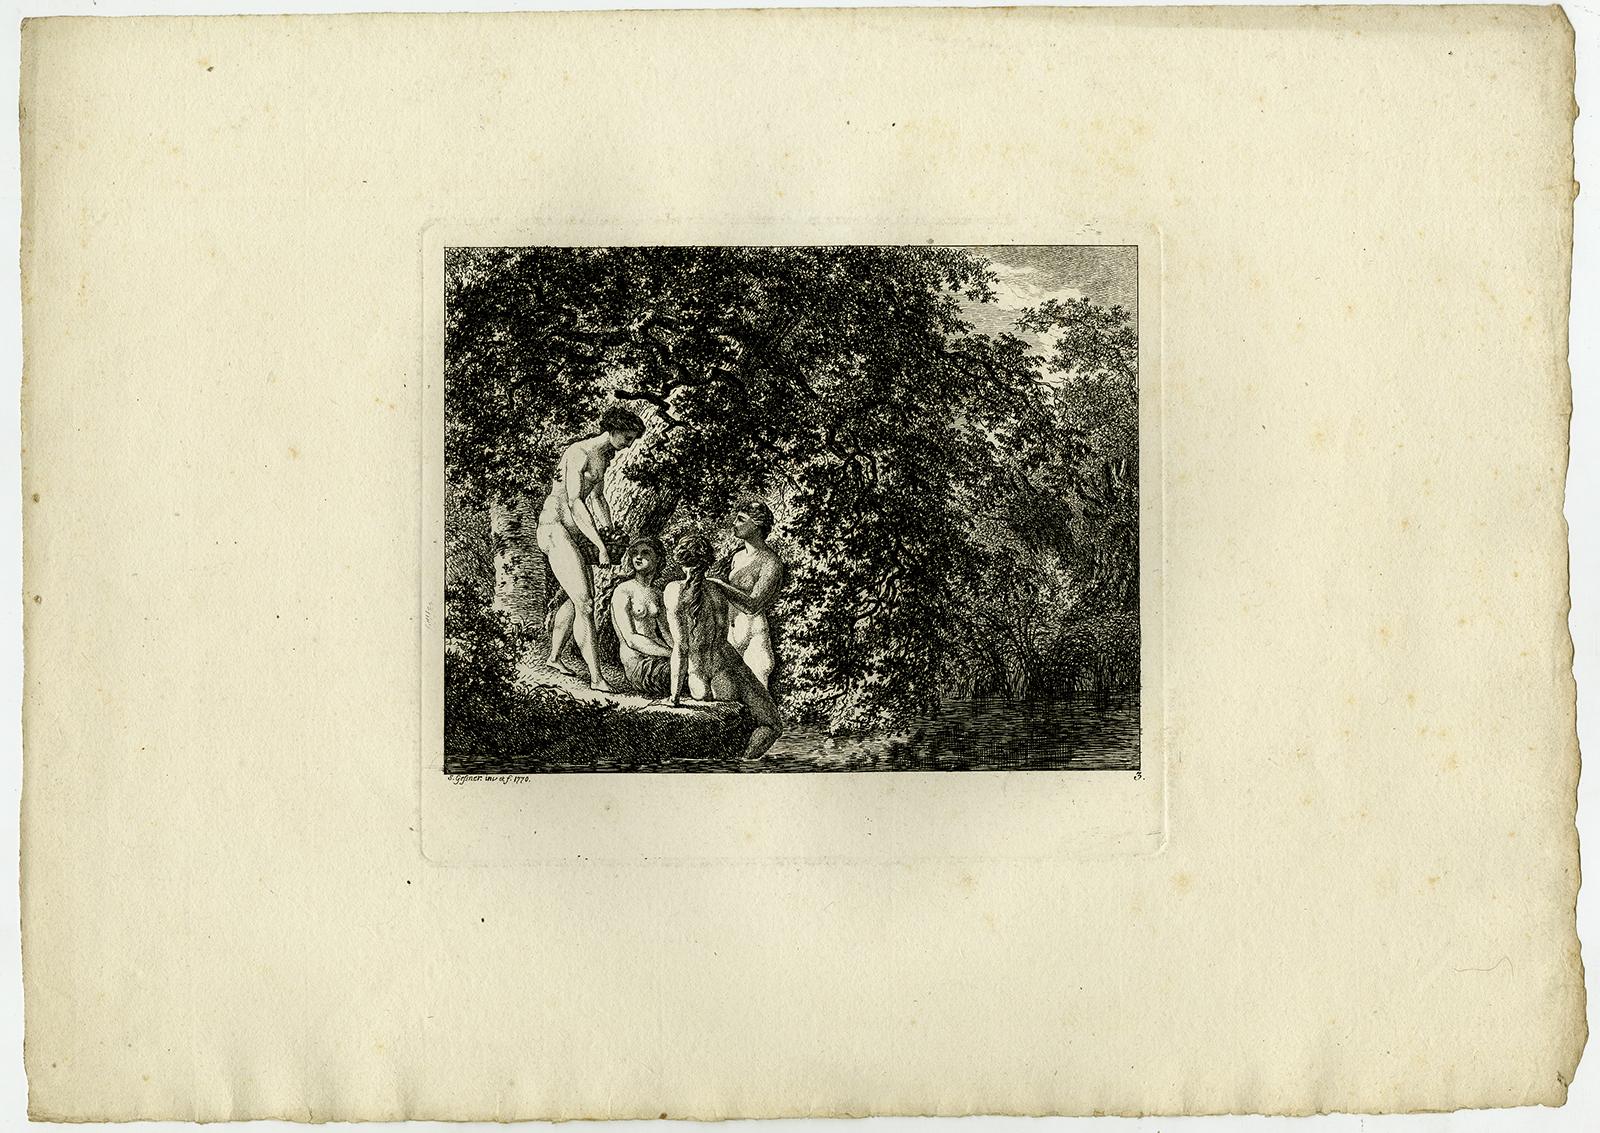 Subject:  Antique Master Print, untitled.  - Landscape with bathing women, with fruit basket.

Description:  From a set with landscapes in the 'antique' taste. . Ref: L/E 27.

Artists and Engravers:  Made by 'Salomon Gessner' after own design.